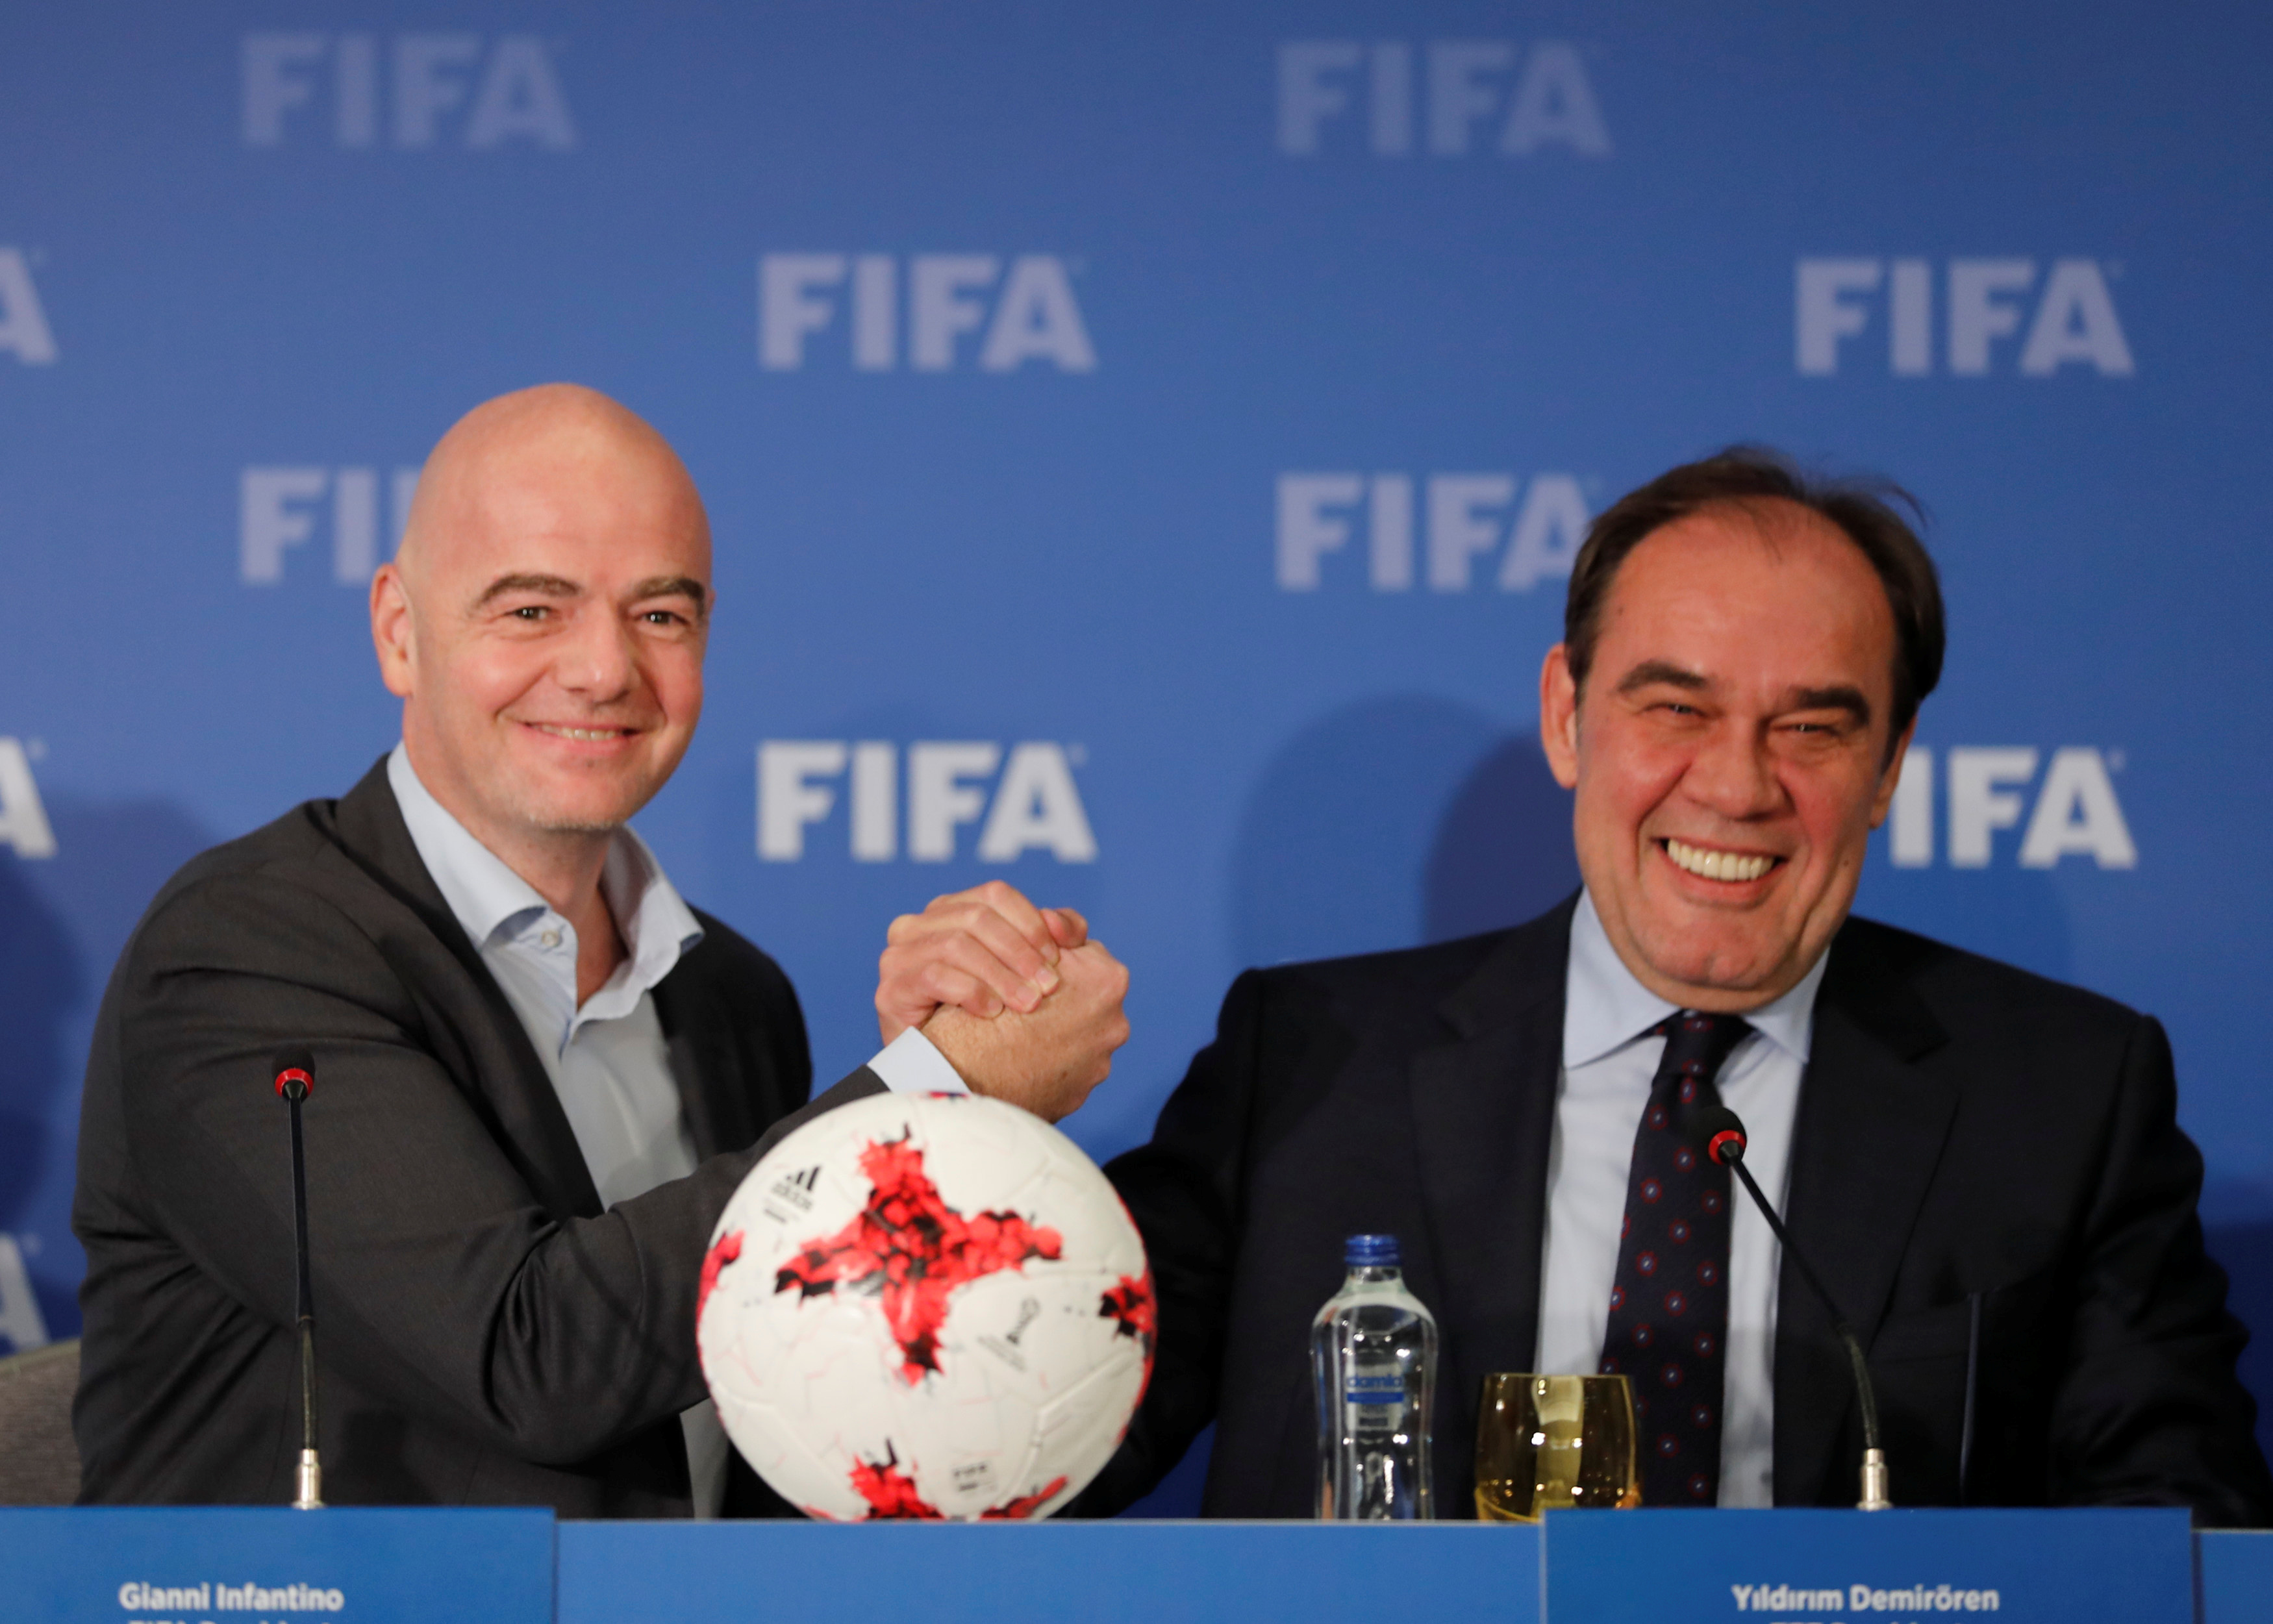 FIFA President Gianni Infantino (L) holds a news conference with Turkish Football Federation (TFF) President Yildirim Demiroren in Istanbul (Reuters)